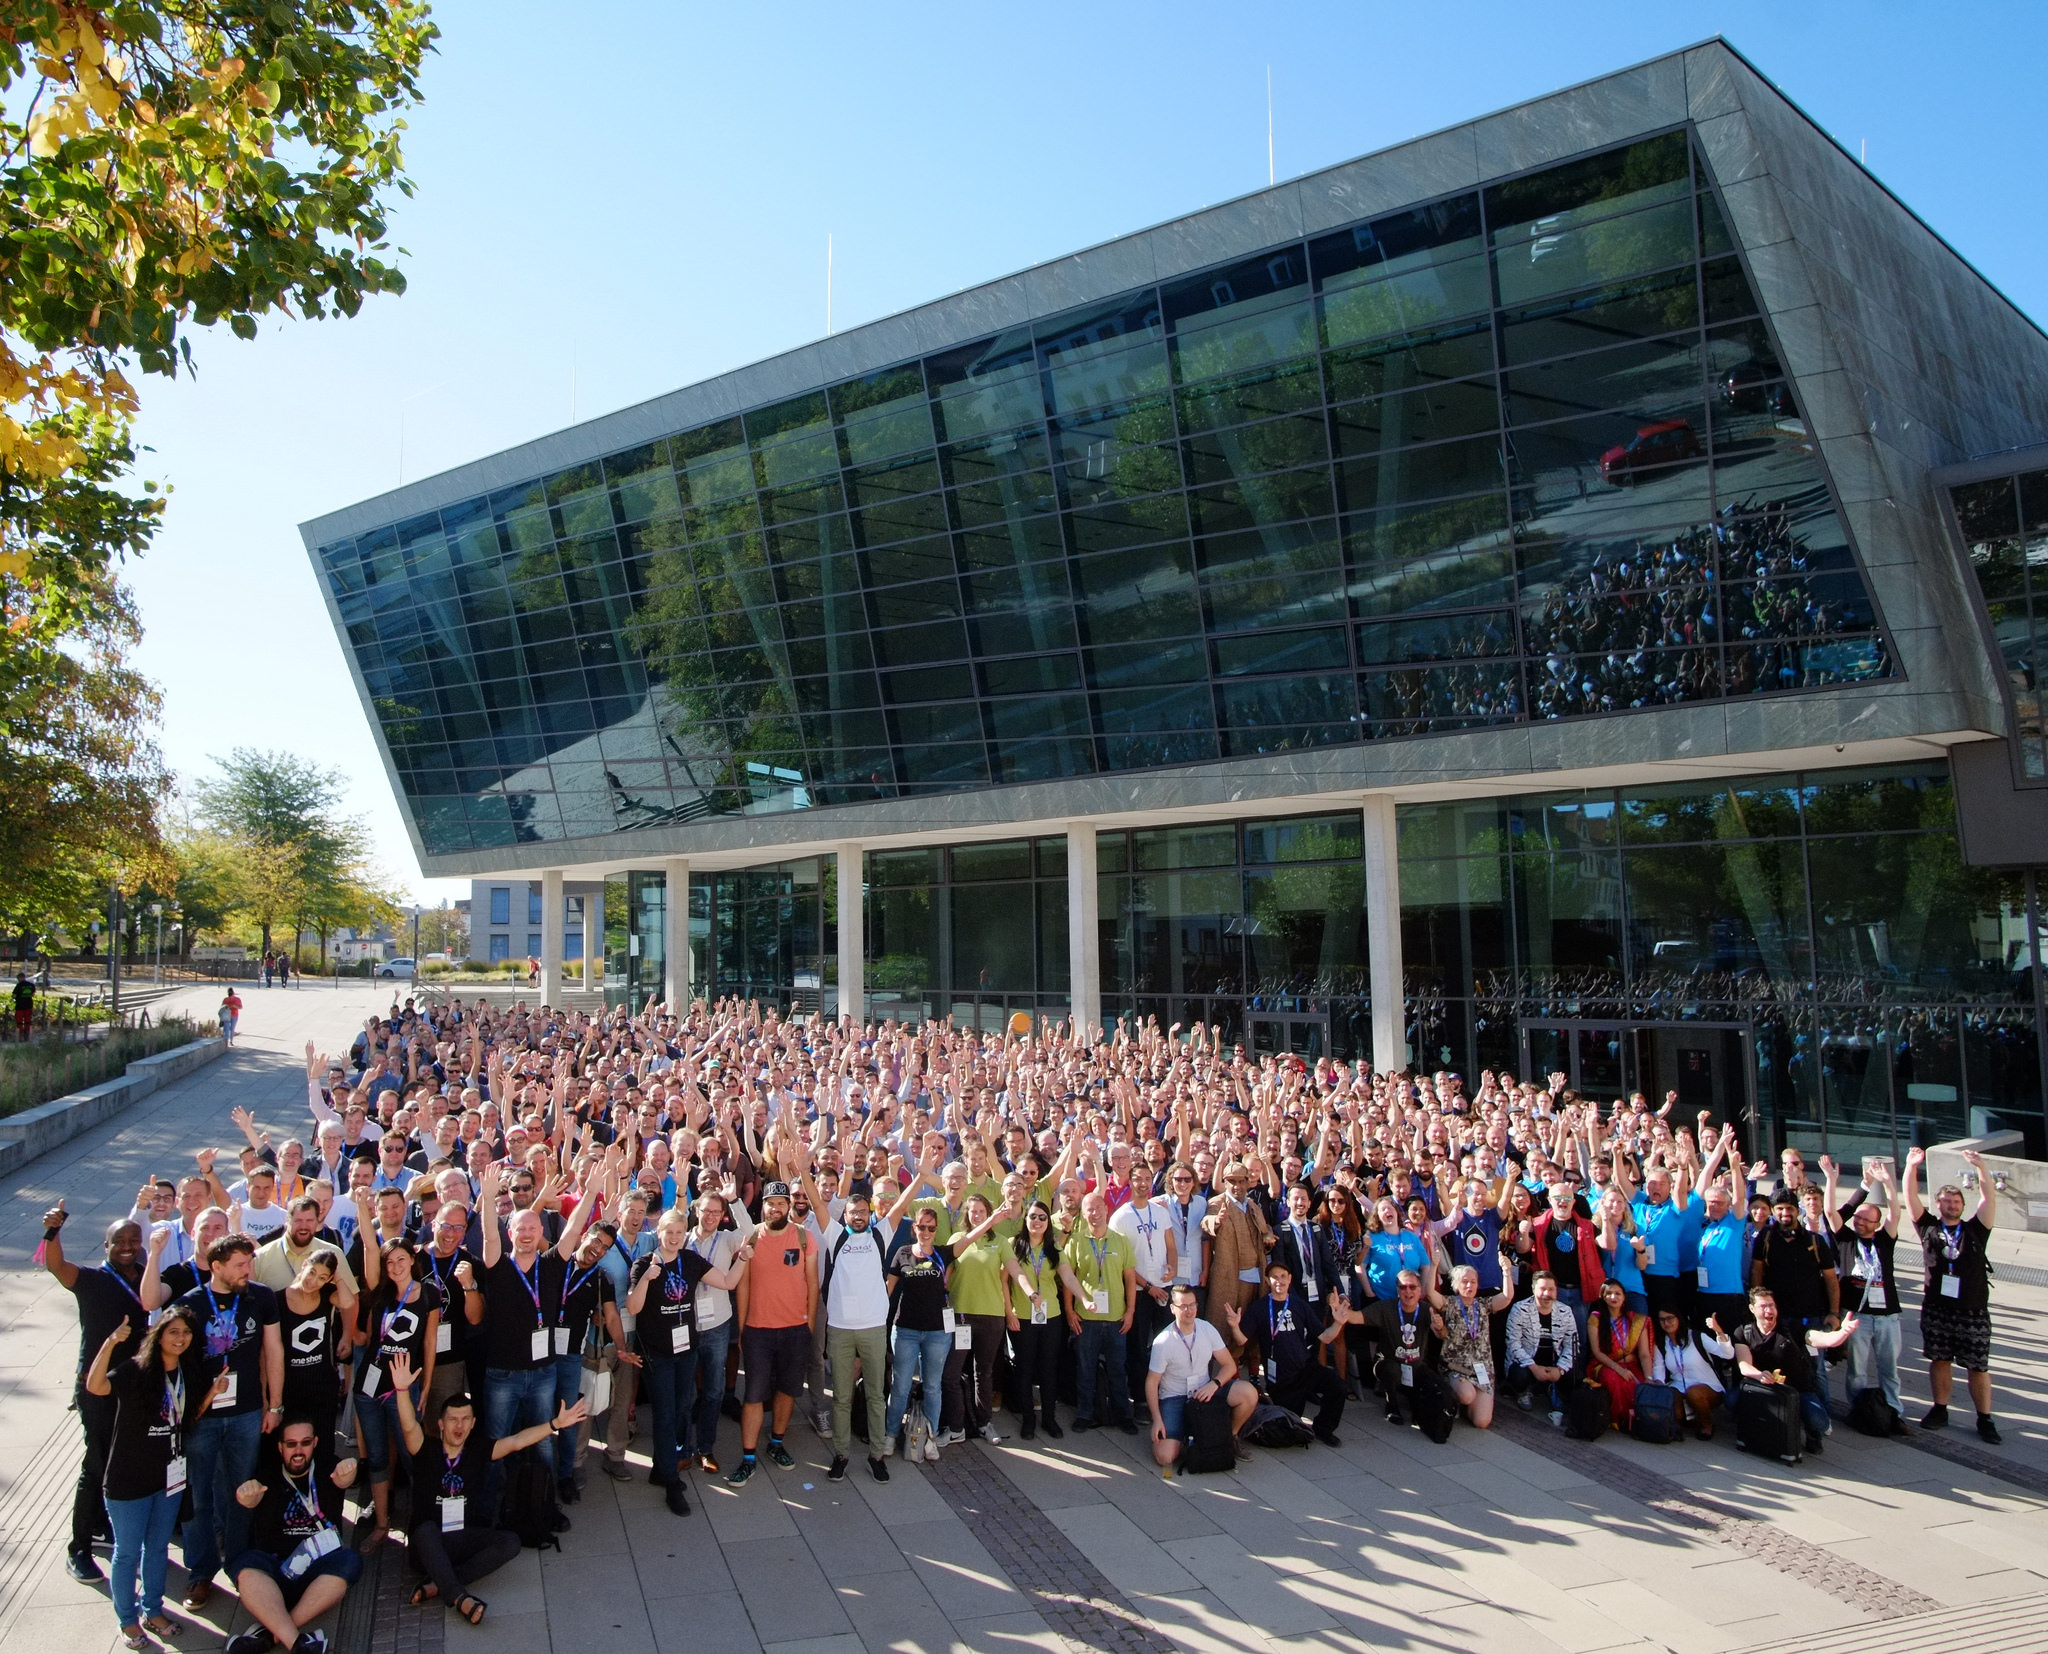 Official Group Photo Drupal Europe Darmstadt 2018 https://www.flickr.com/photos/amazeelabs/43723875575/ (CC BY-NC-SA 2.0)